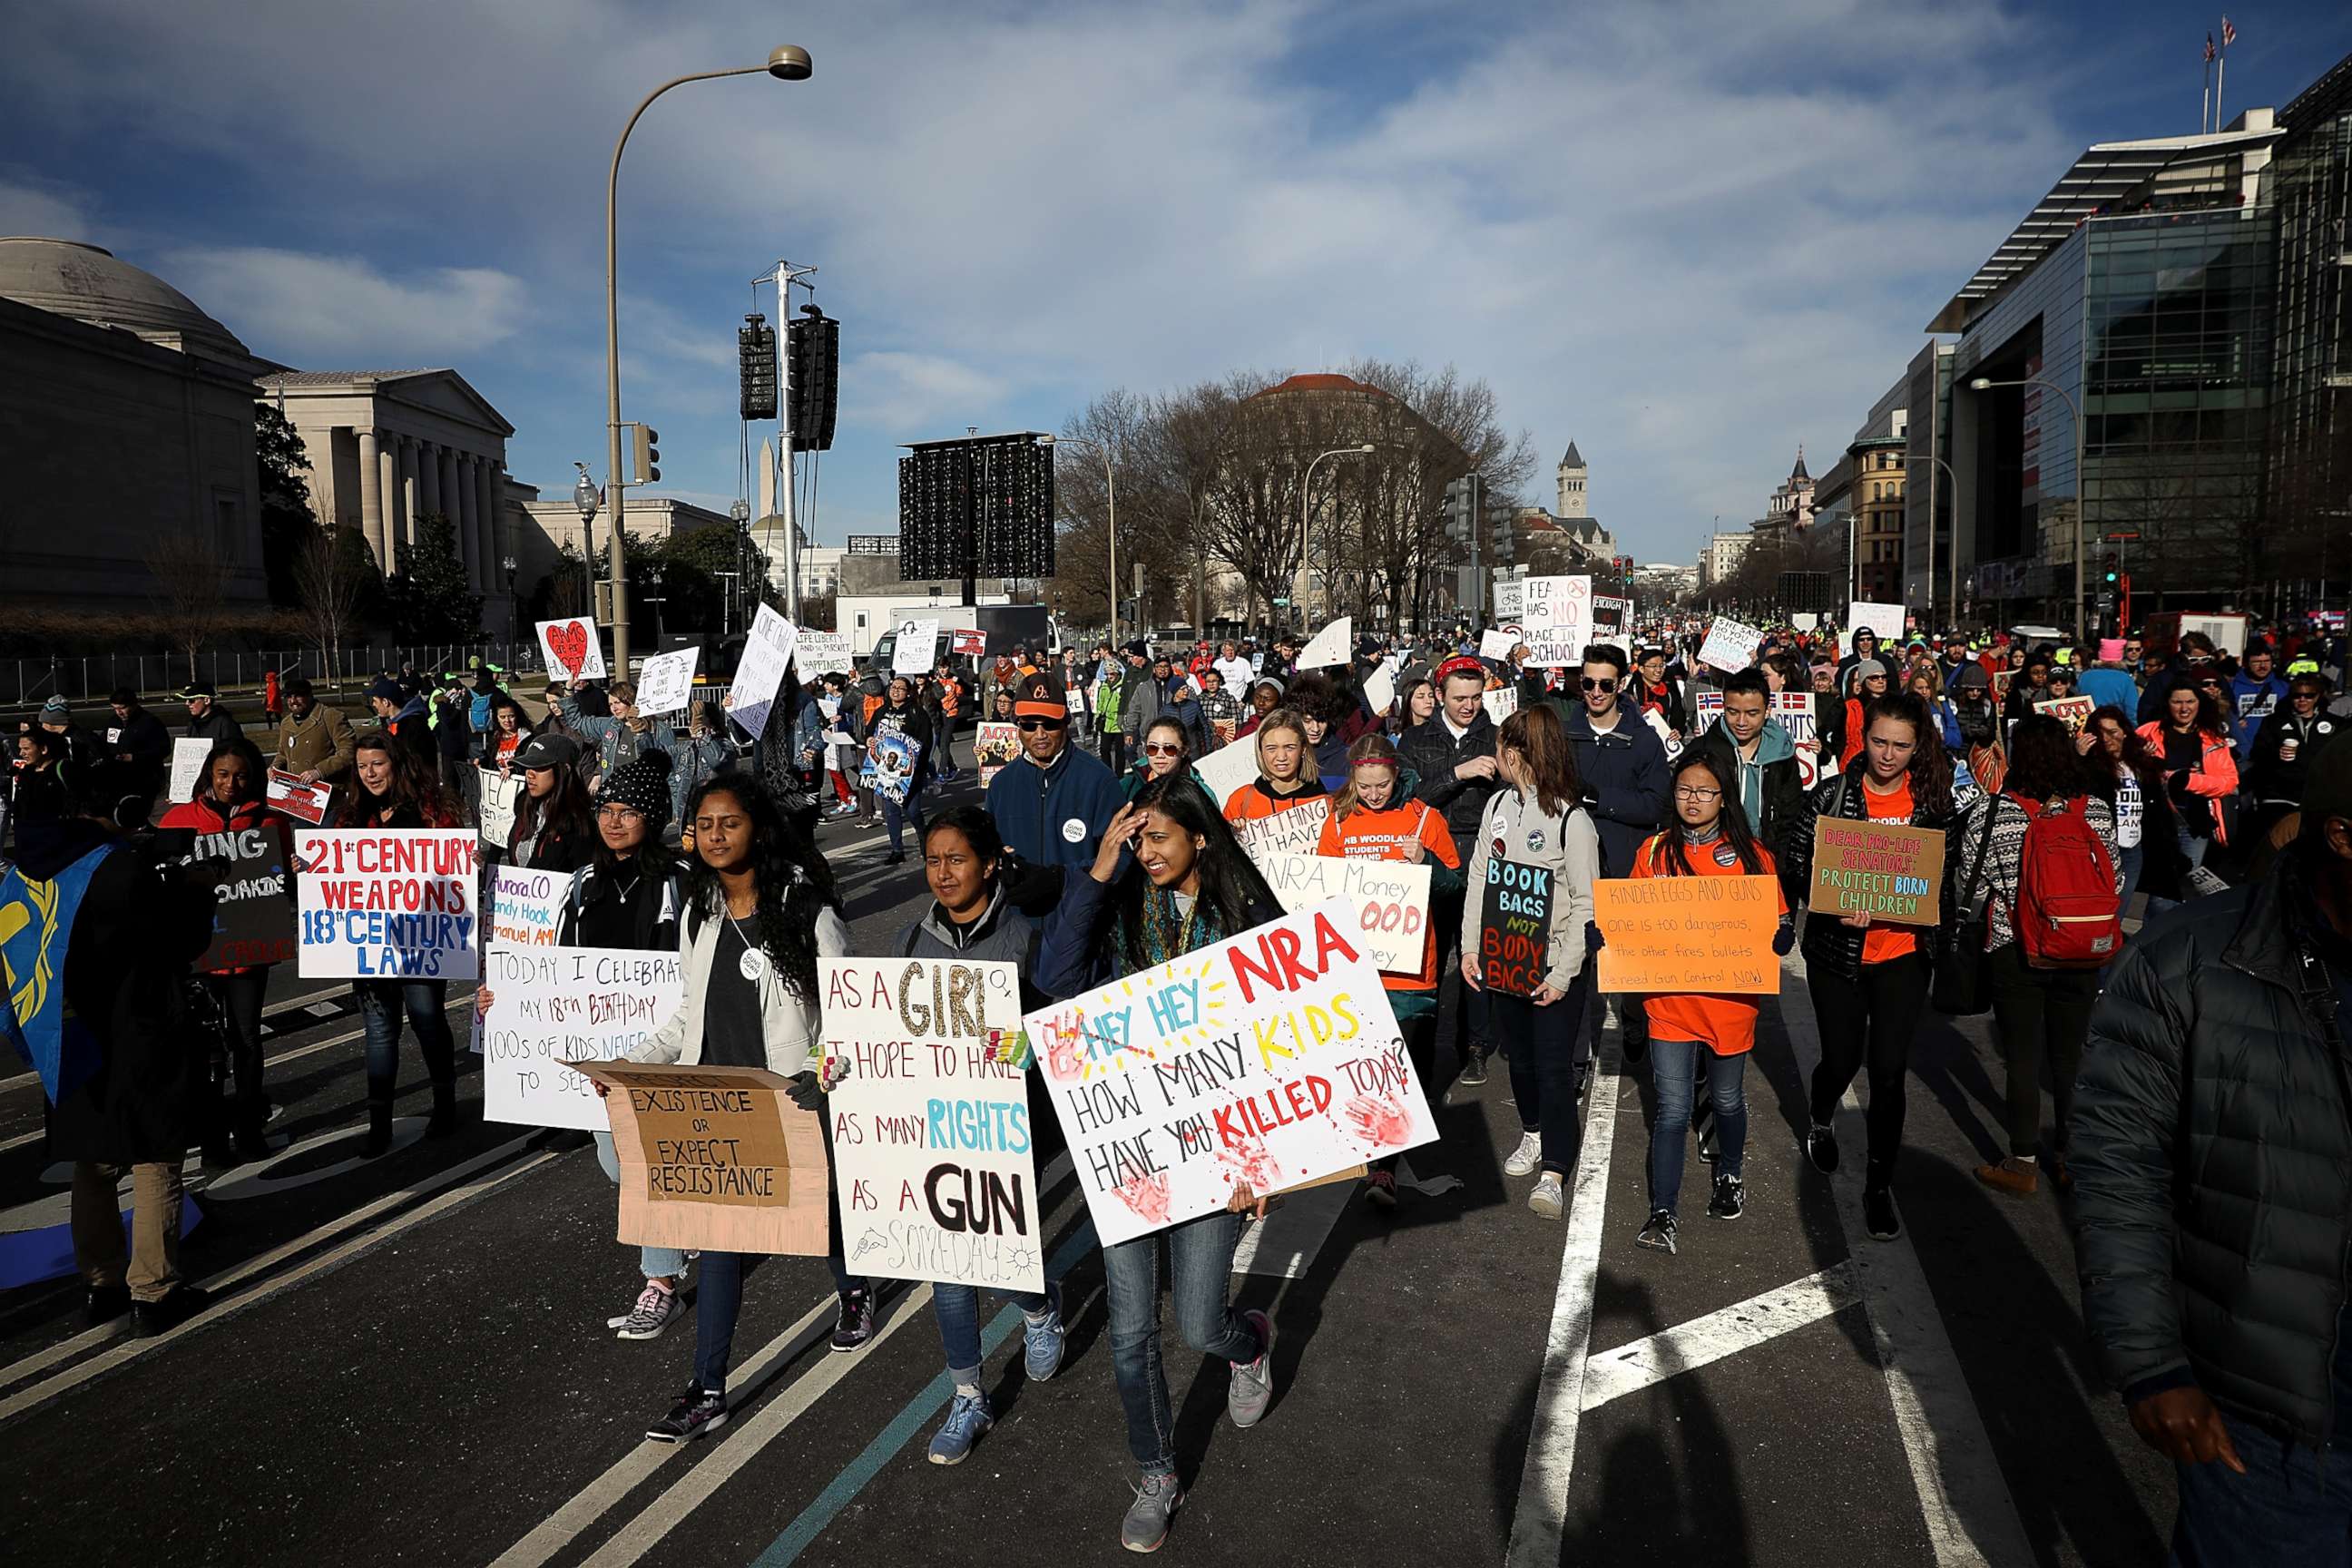 PHOTO: Protesters arrive for the March for Our Lives rally, March 24, 2018 in Washington, D.C.